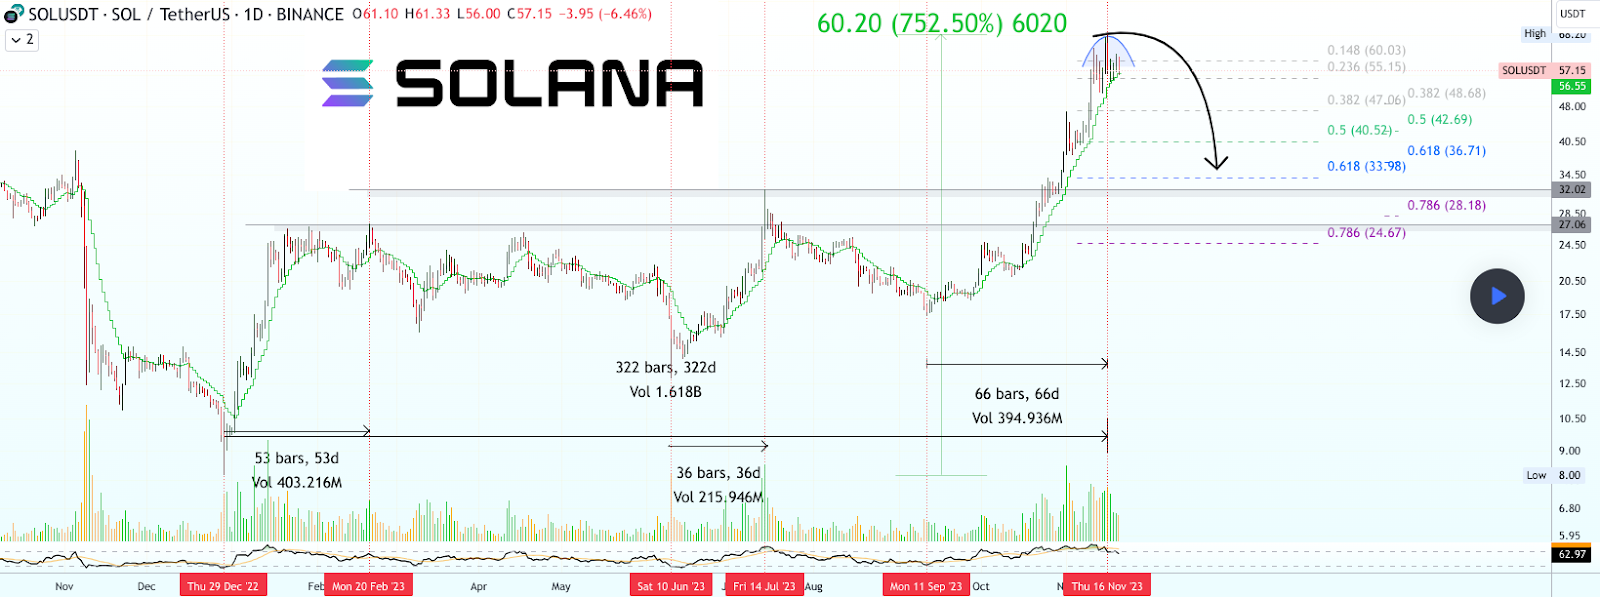 Solana surging, investors exploring these 5 altcoins - 2